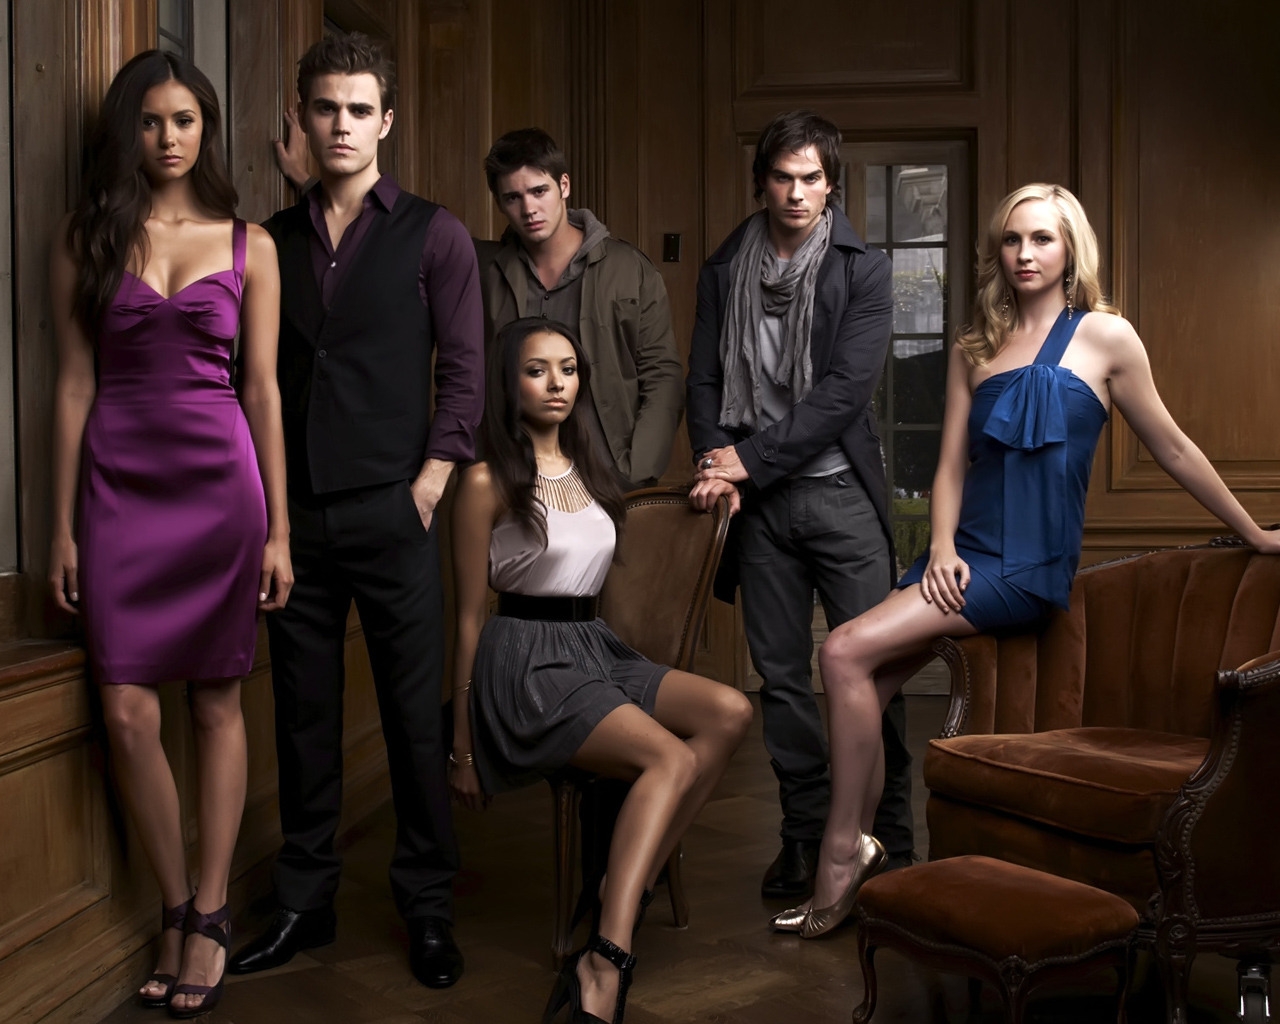 The Vampire Diaries Cast for 1280 x 1024 resolution